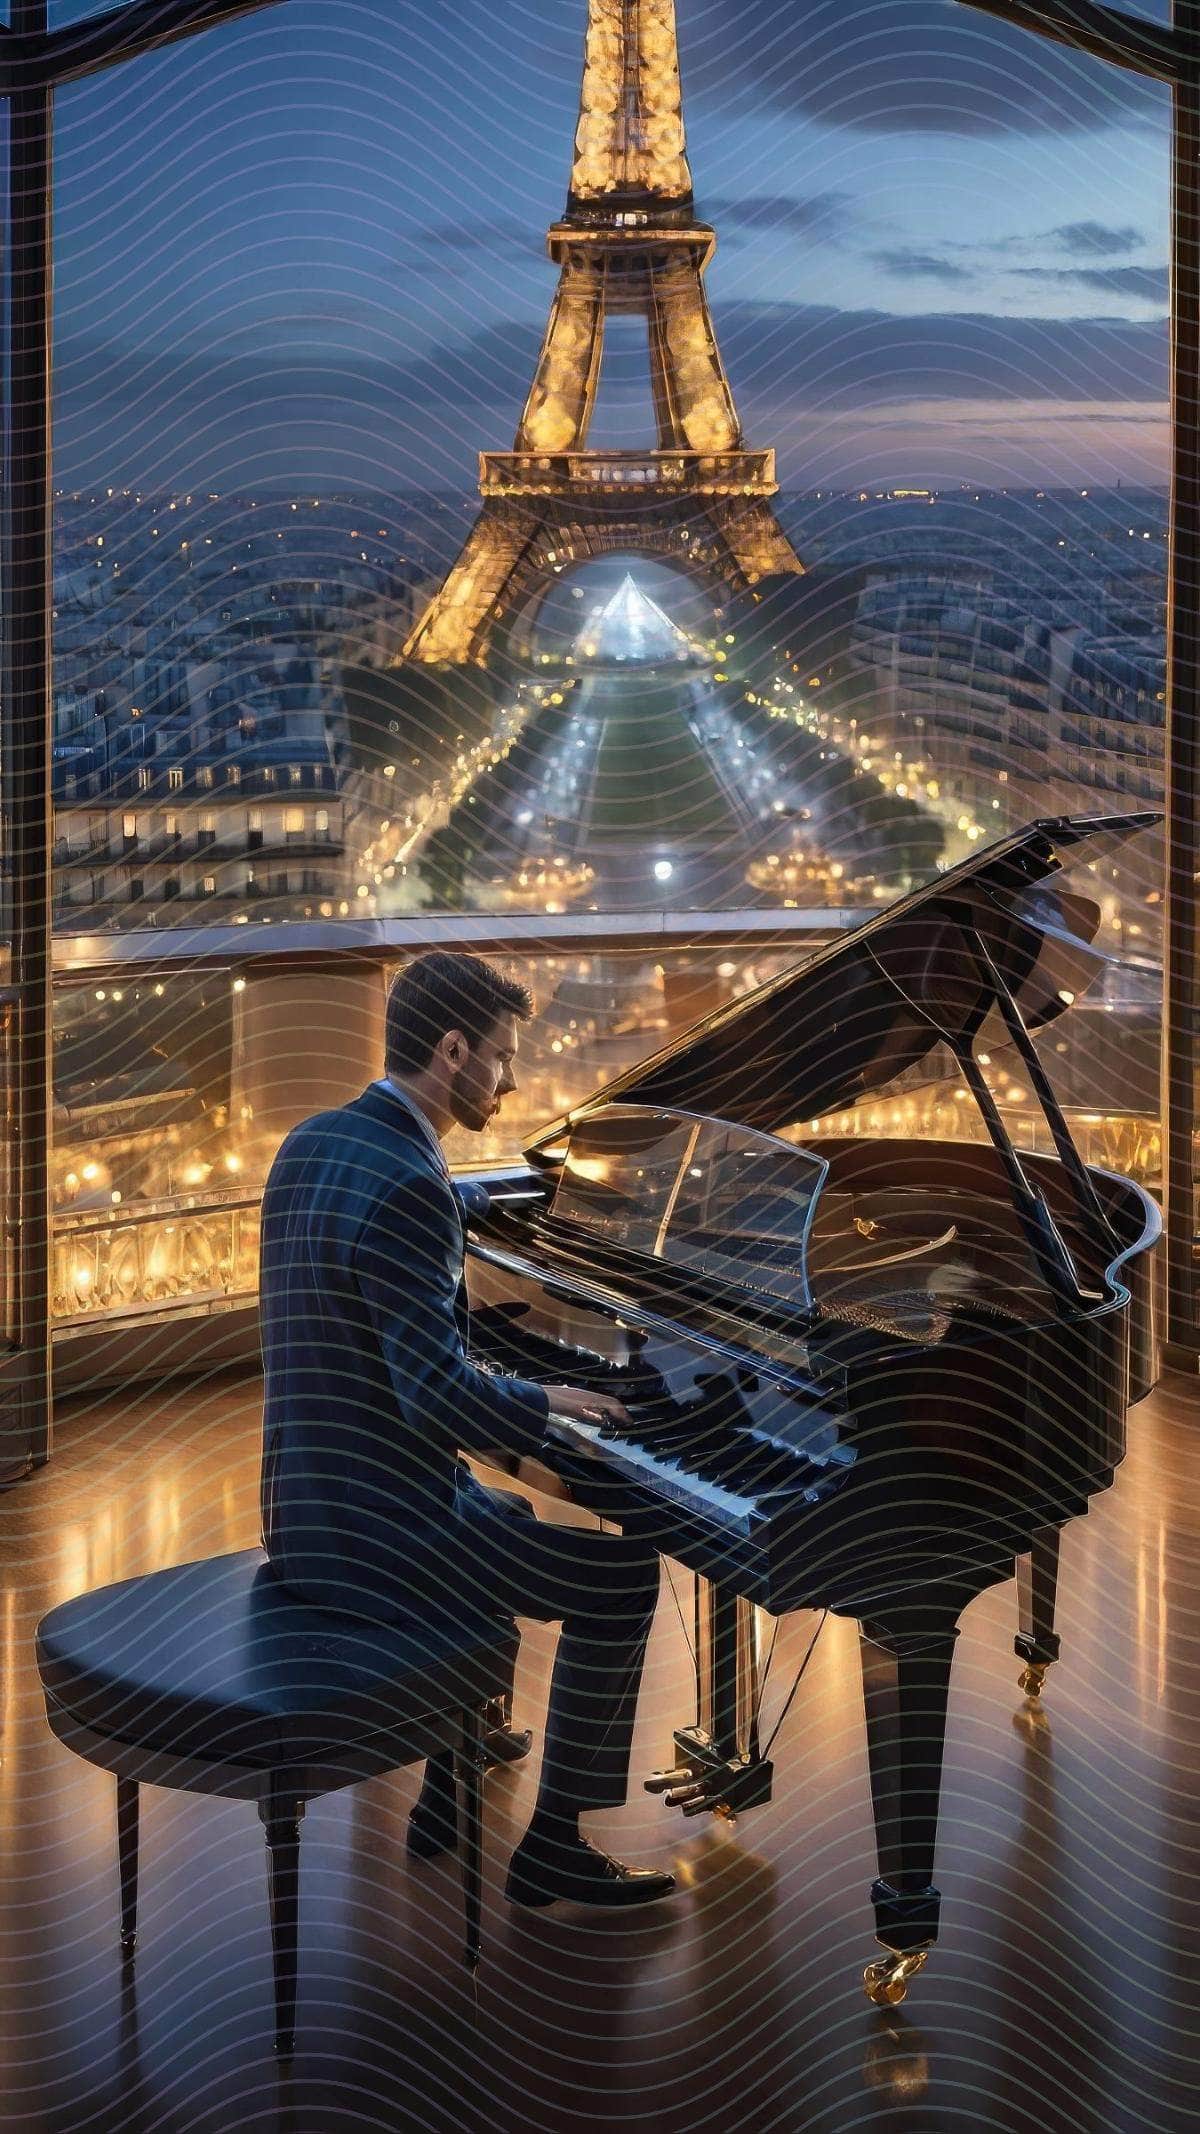 A Man Playing A Grand Piano In Front of Eiffel Tower